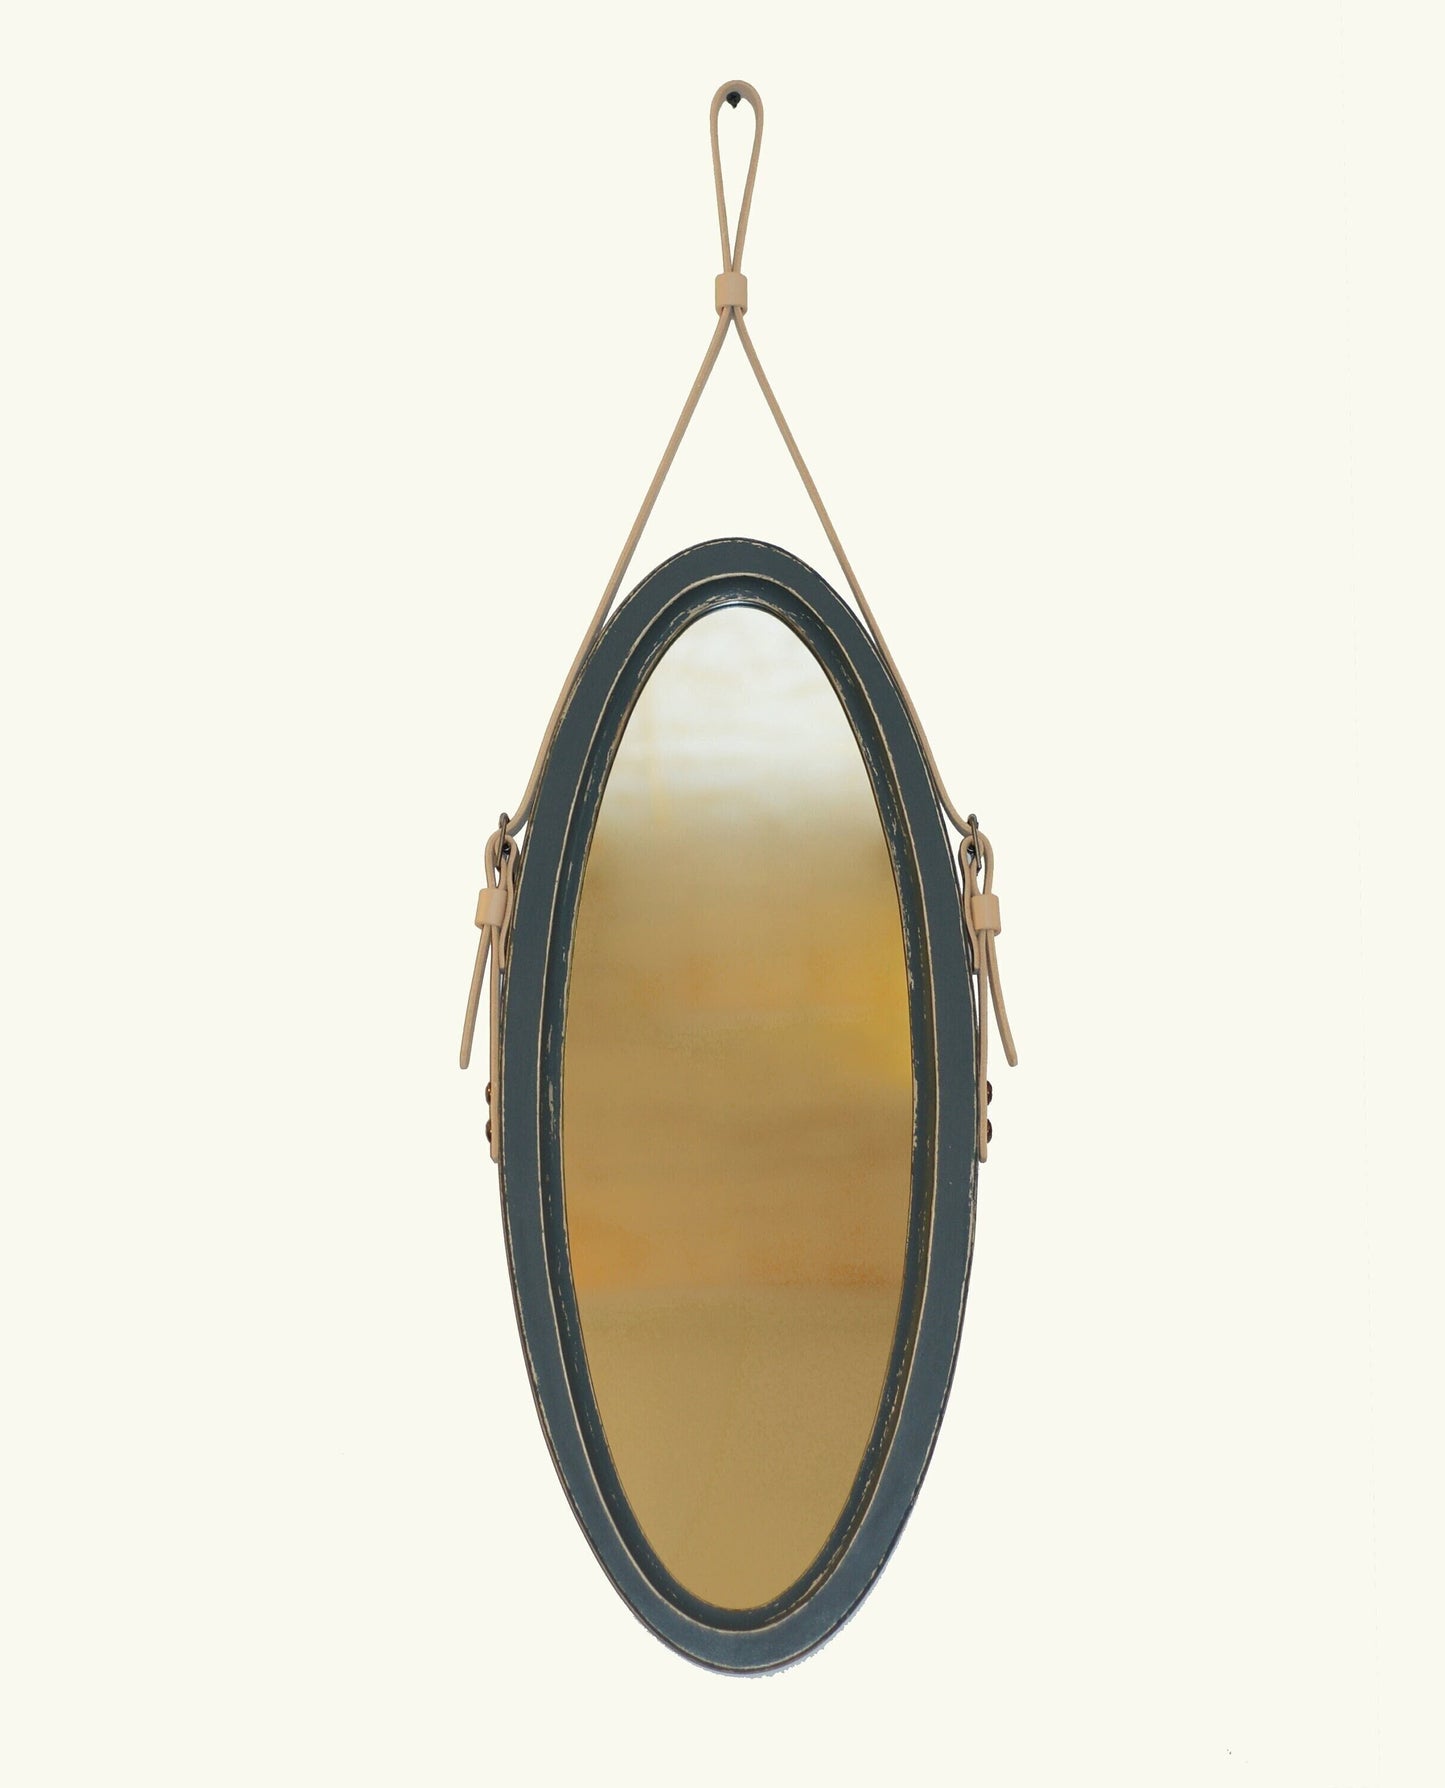 Modern wood oval mirror living room, Rustic bathroom mirror leather strap, Wooden framed mirror for wall decor, Vintage leather mirror